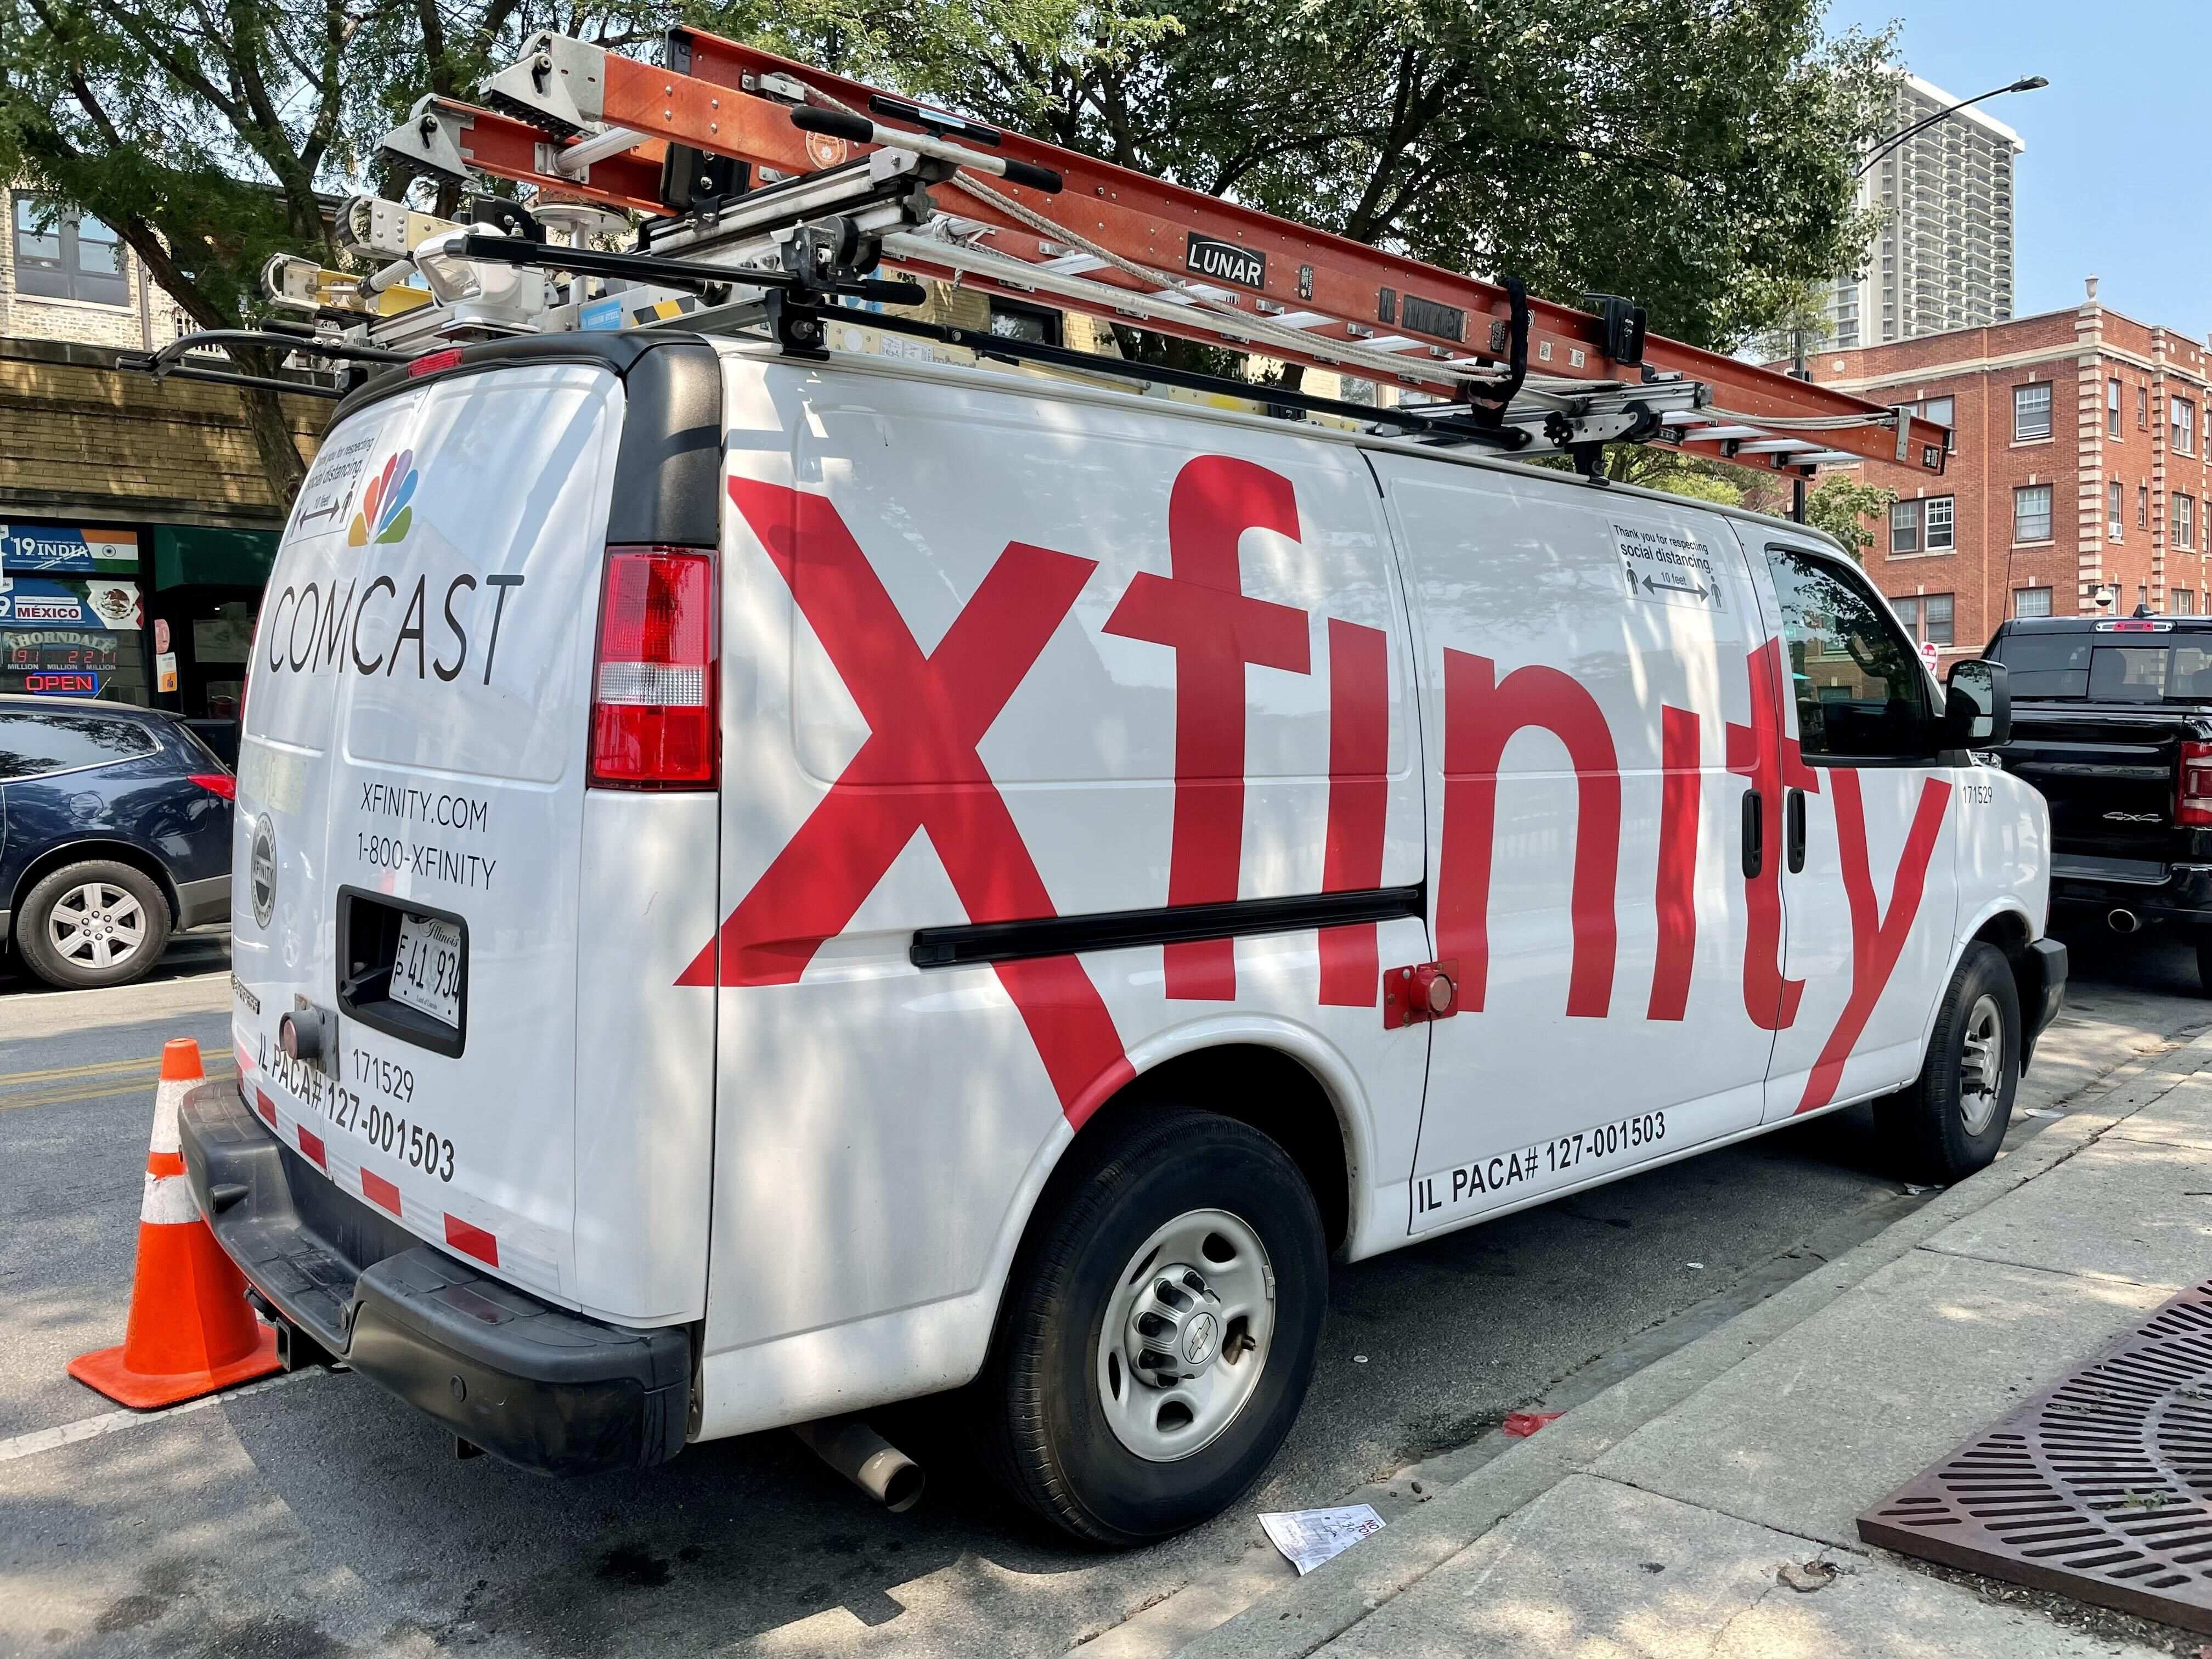 Xfinity home internet review: Untangling cable's complexities 